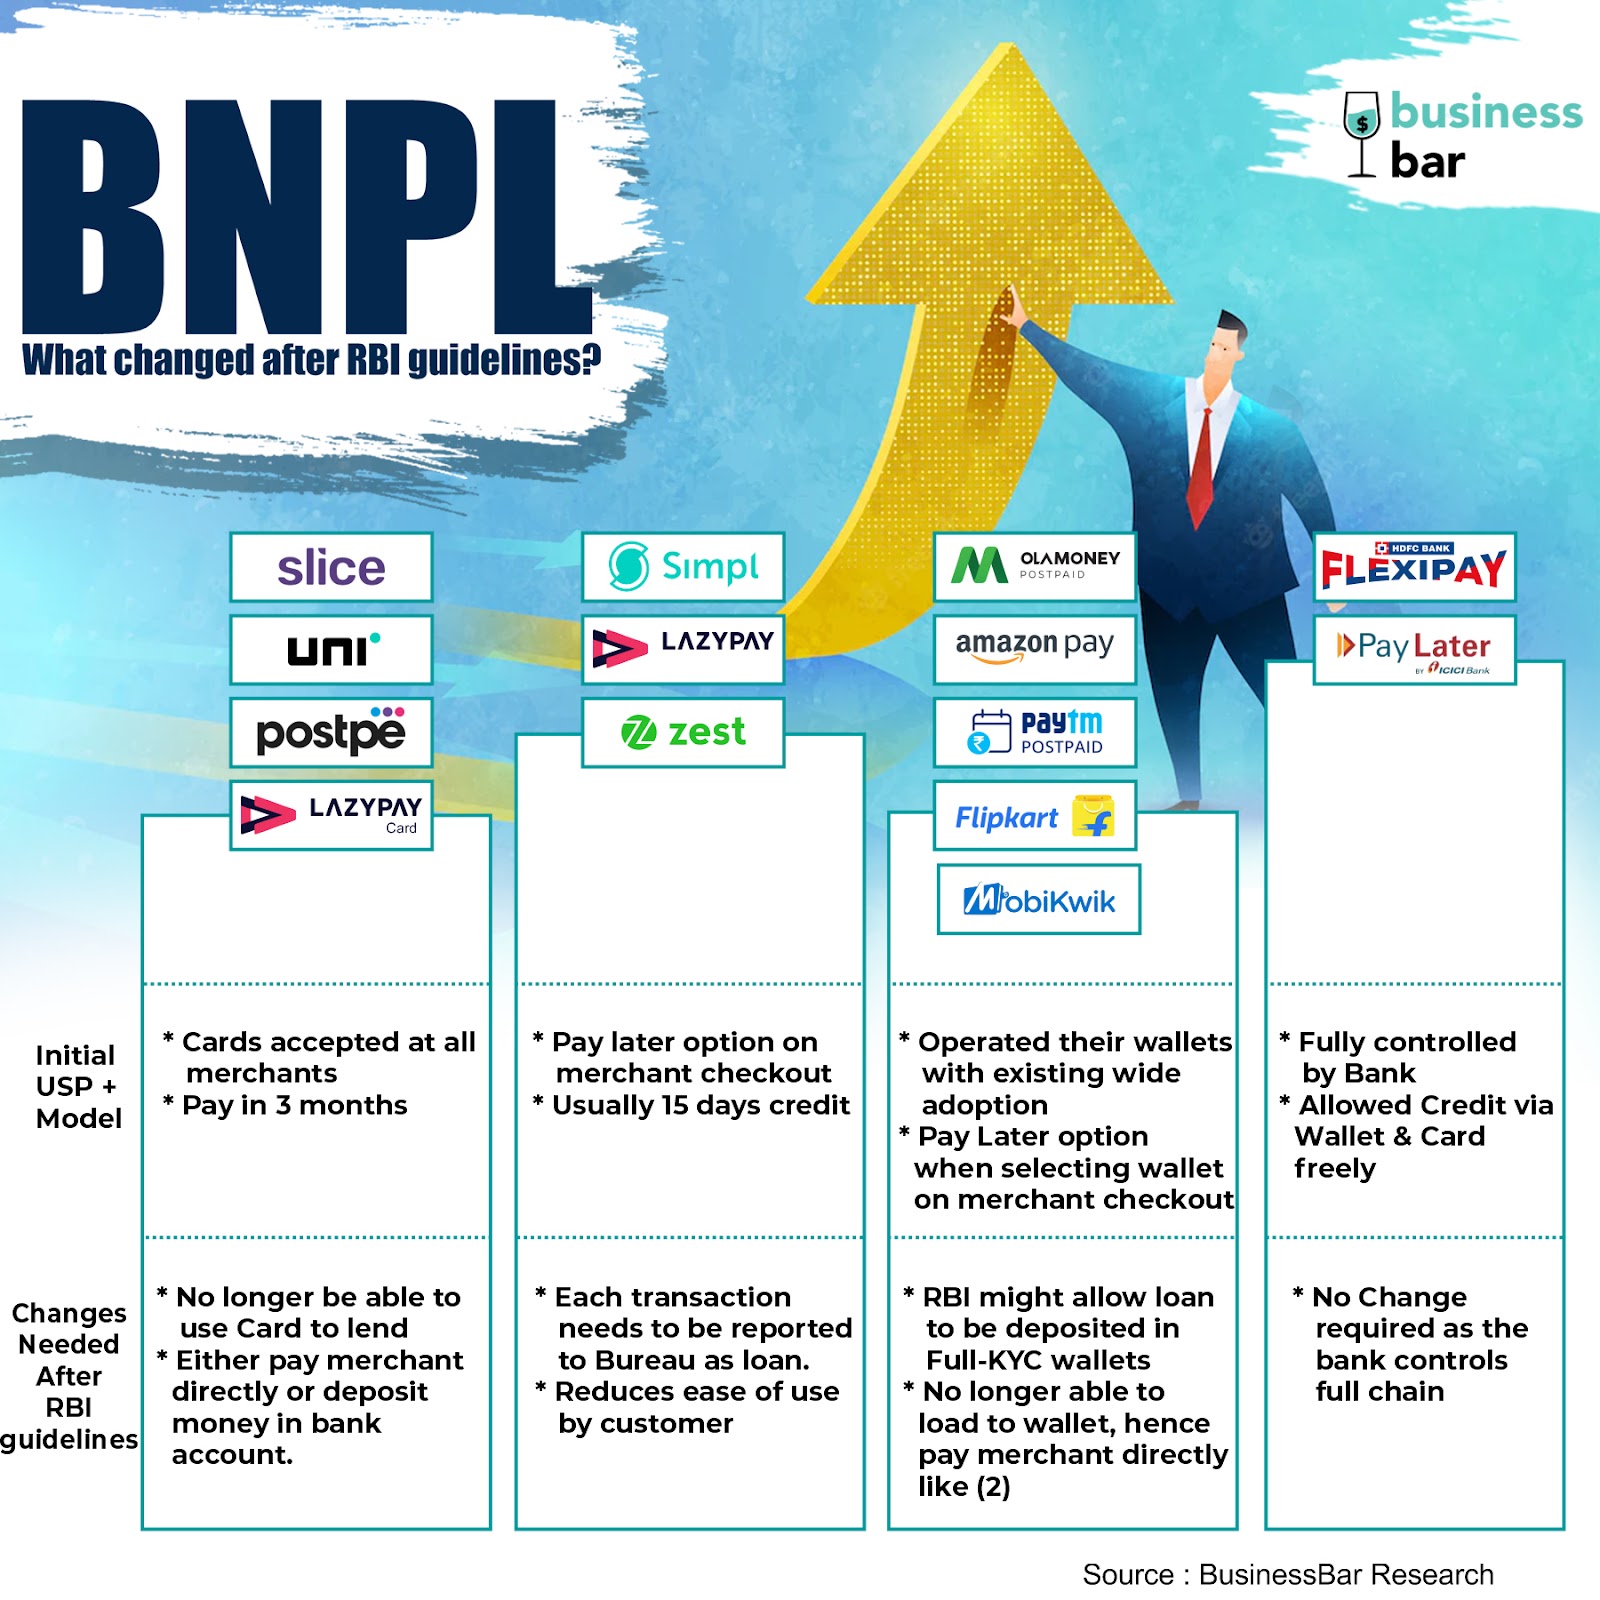 changes needed by each BNPL company